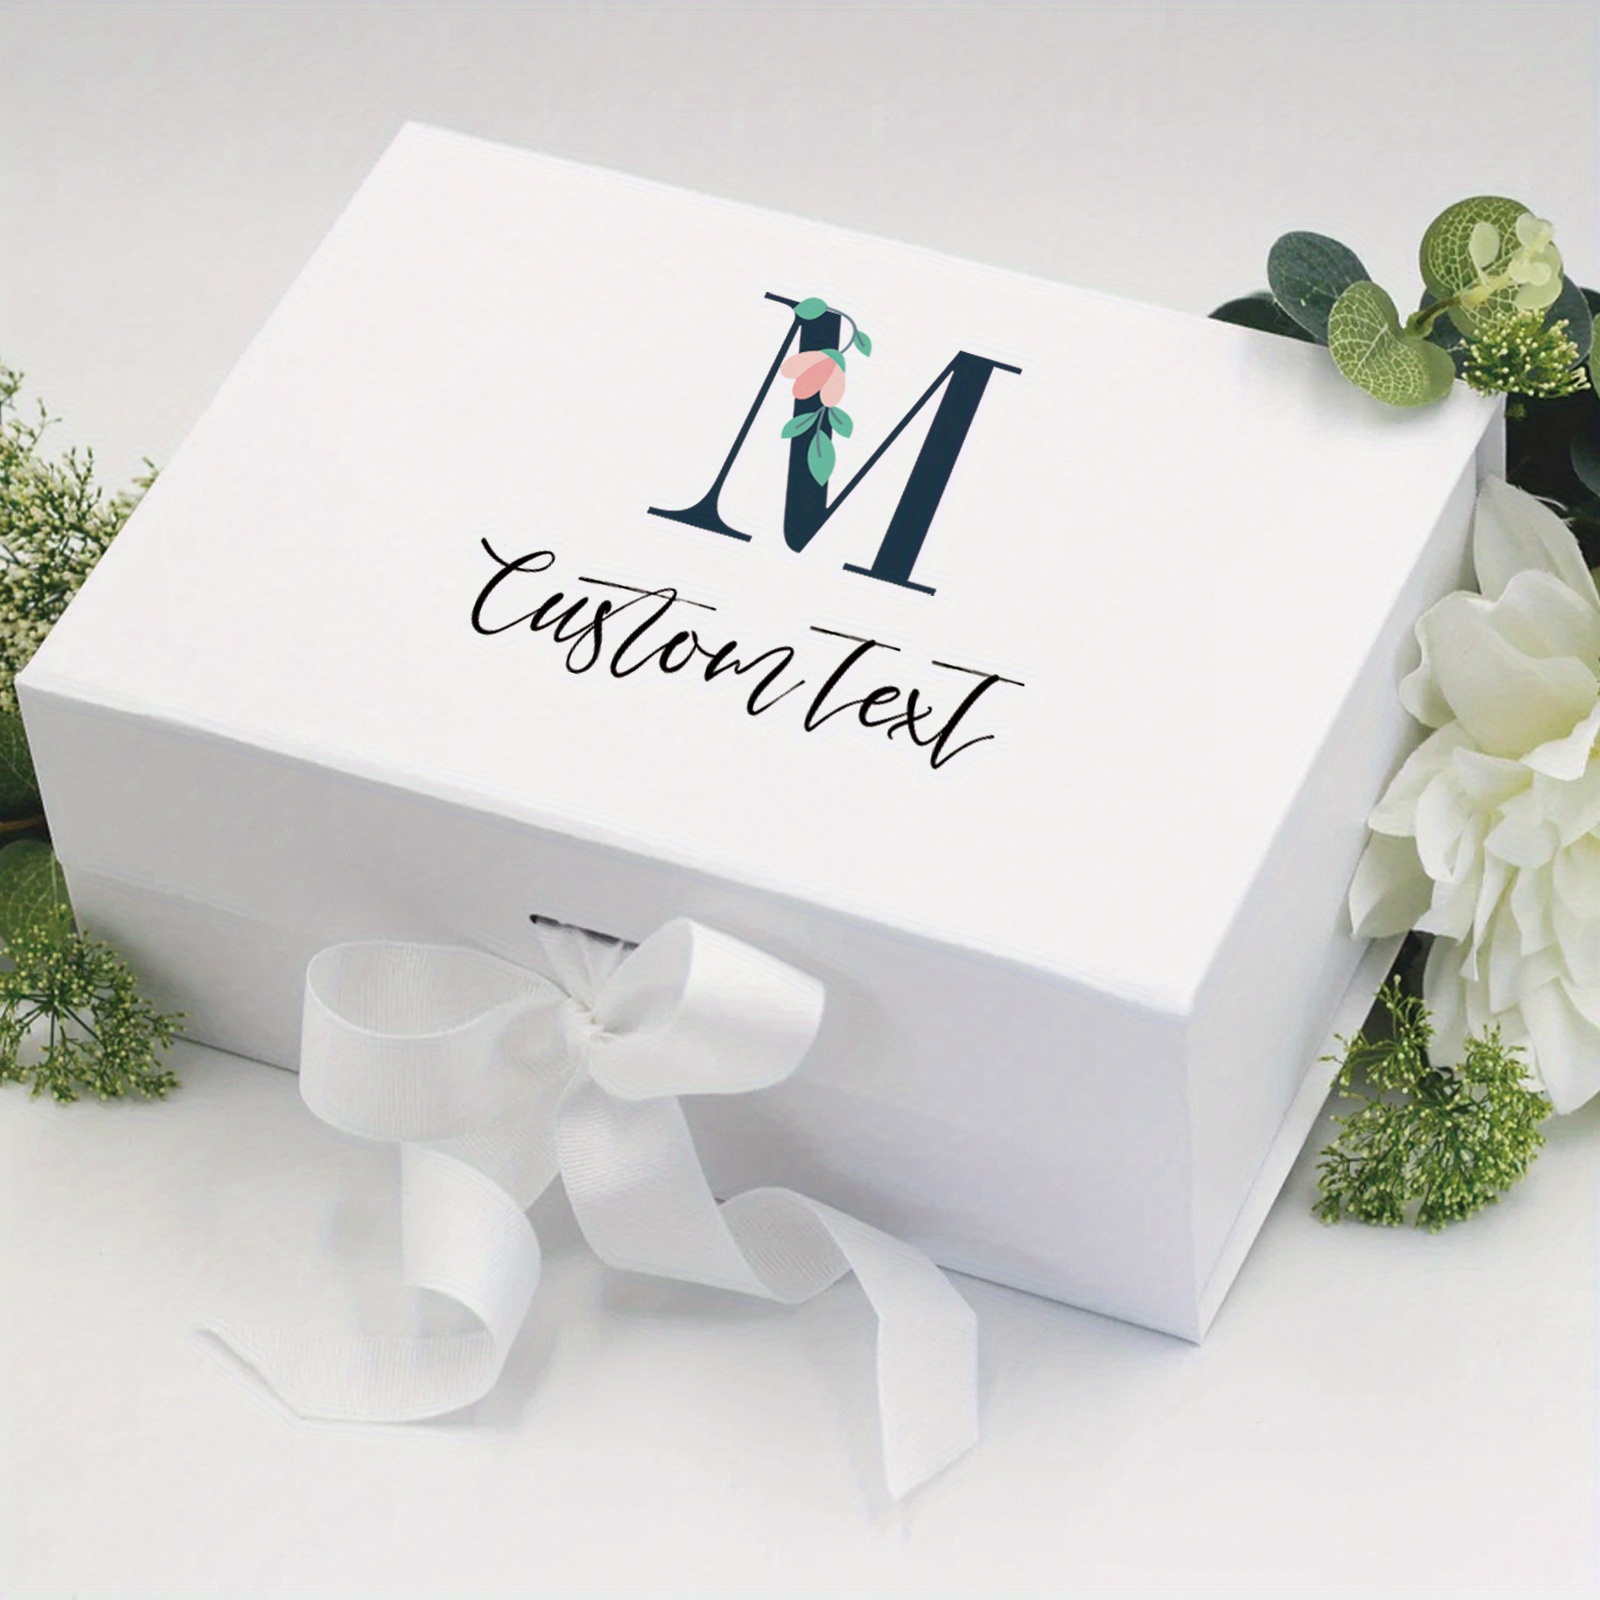 

Custom Magnetic Gift Box With Lid & Ribbon - Collapsible, Decorative Wooden Present Case For Men & Women - Perfect For Proposals, Christmas, Valentine's, Weddings, Birthdays, Mother's Day